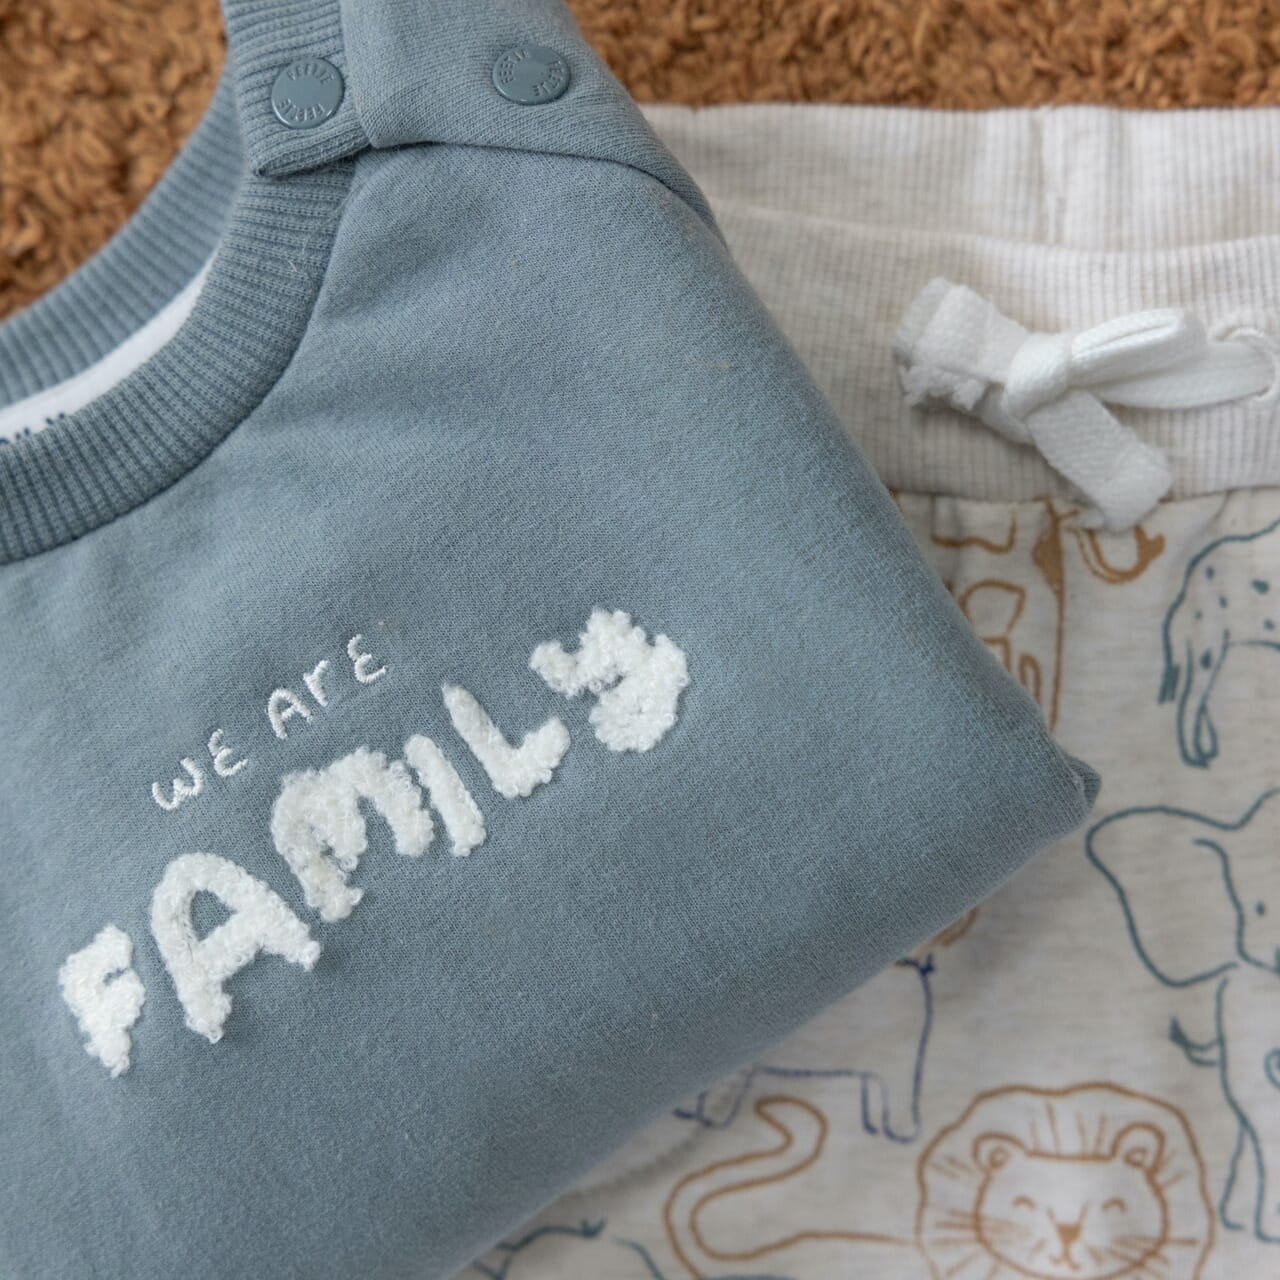 ANIMALS "We Are Family" Brushed Fleece Sweat Top